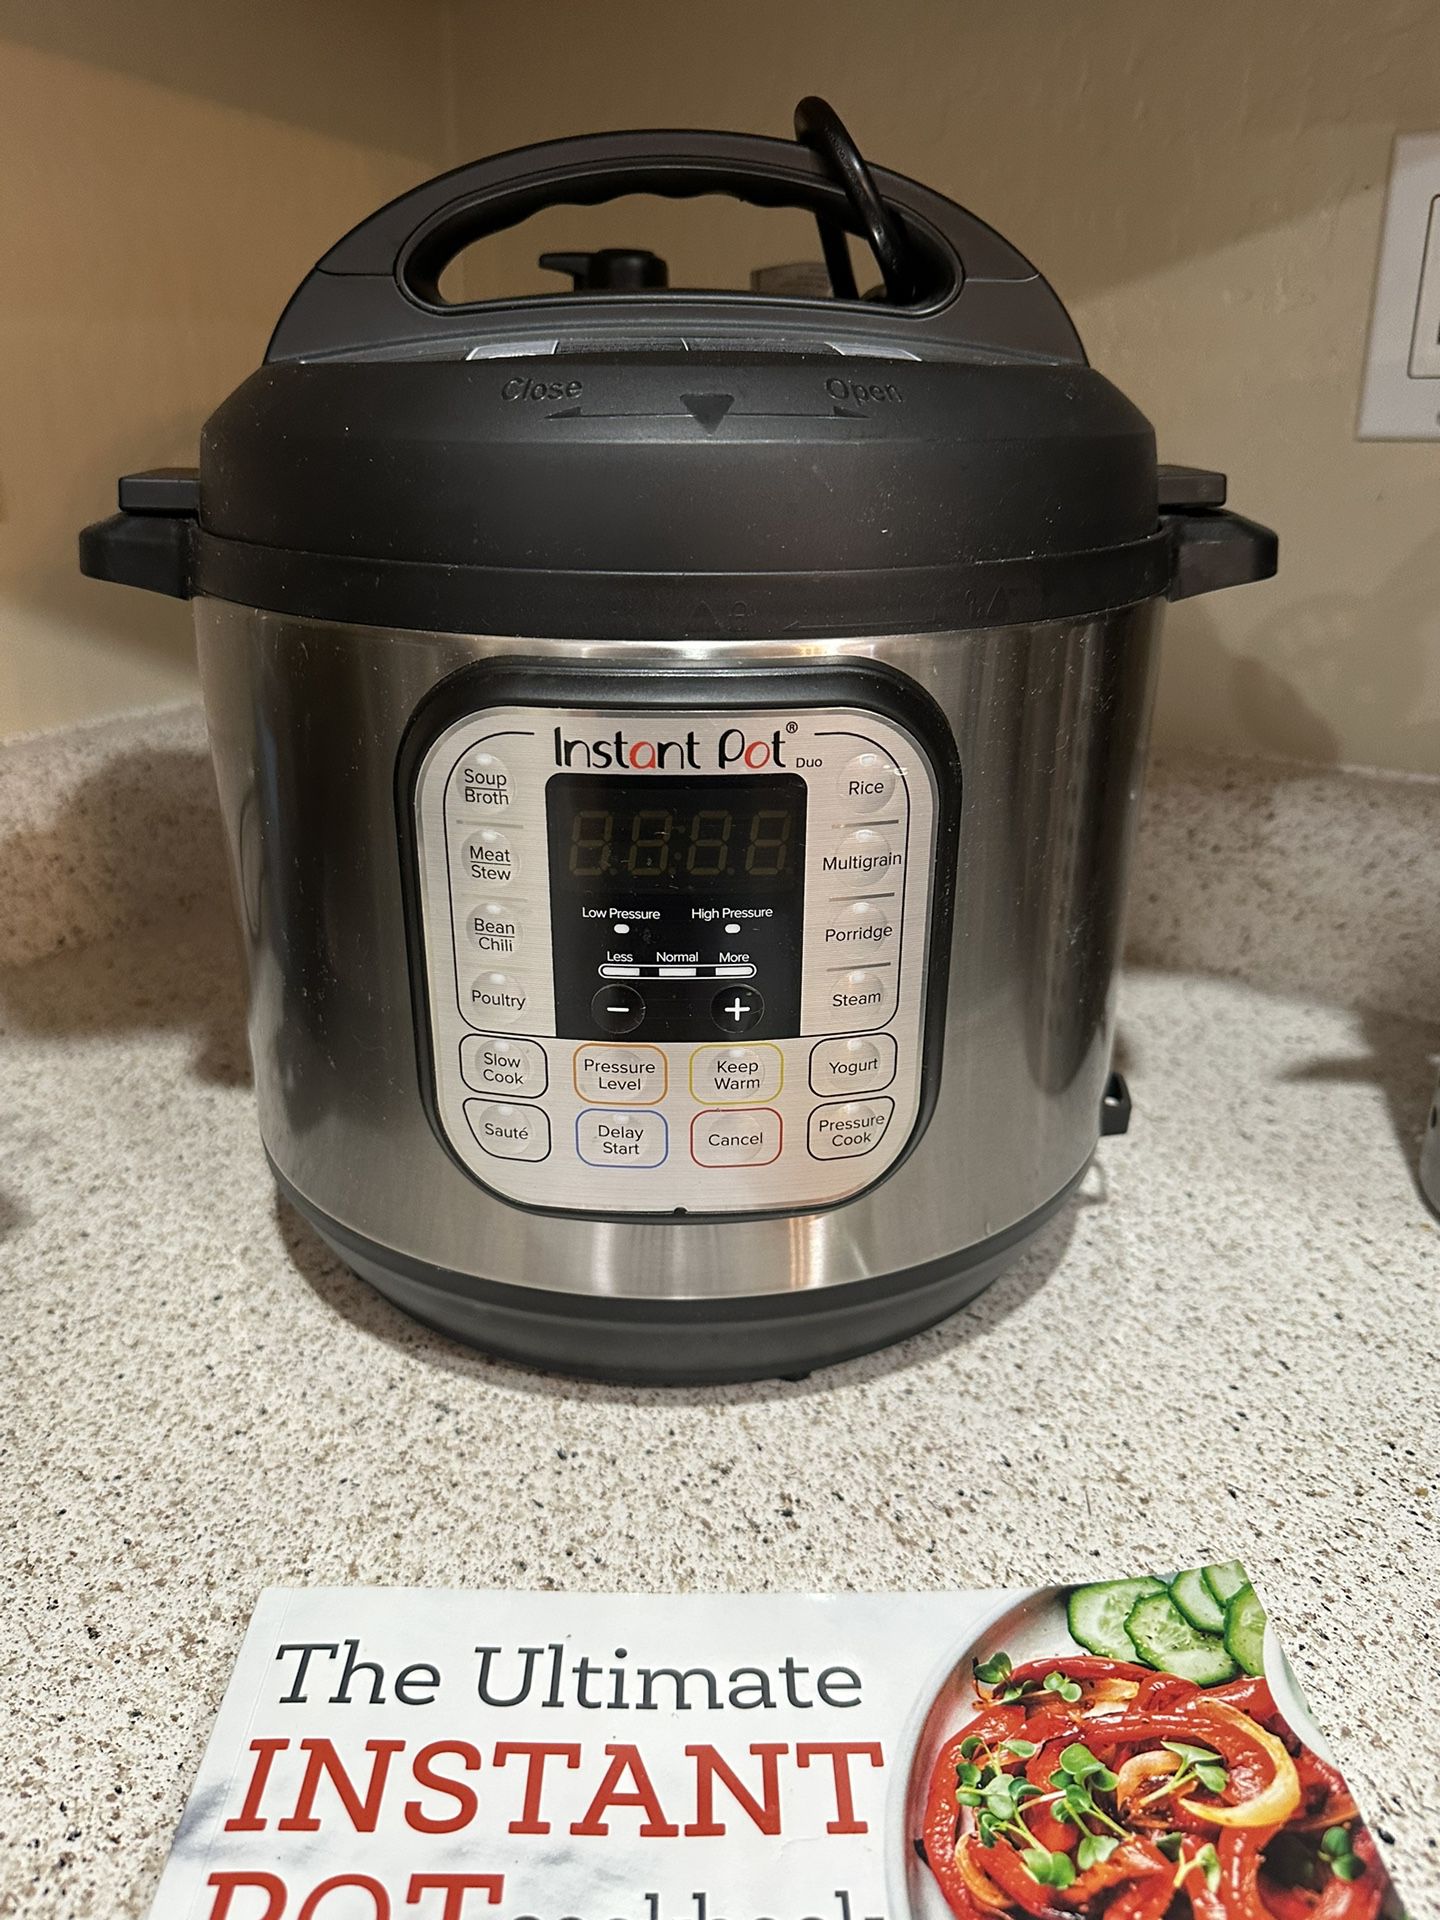 REDUCED PRICE Instant Pot Duo 60 V4